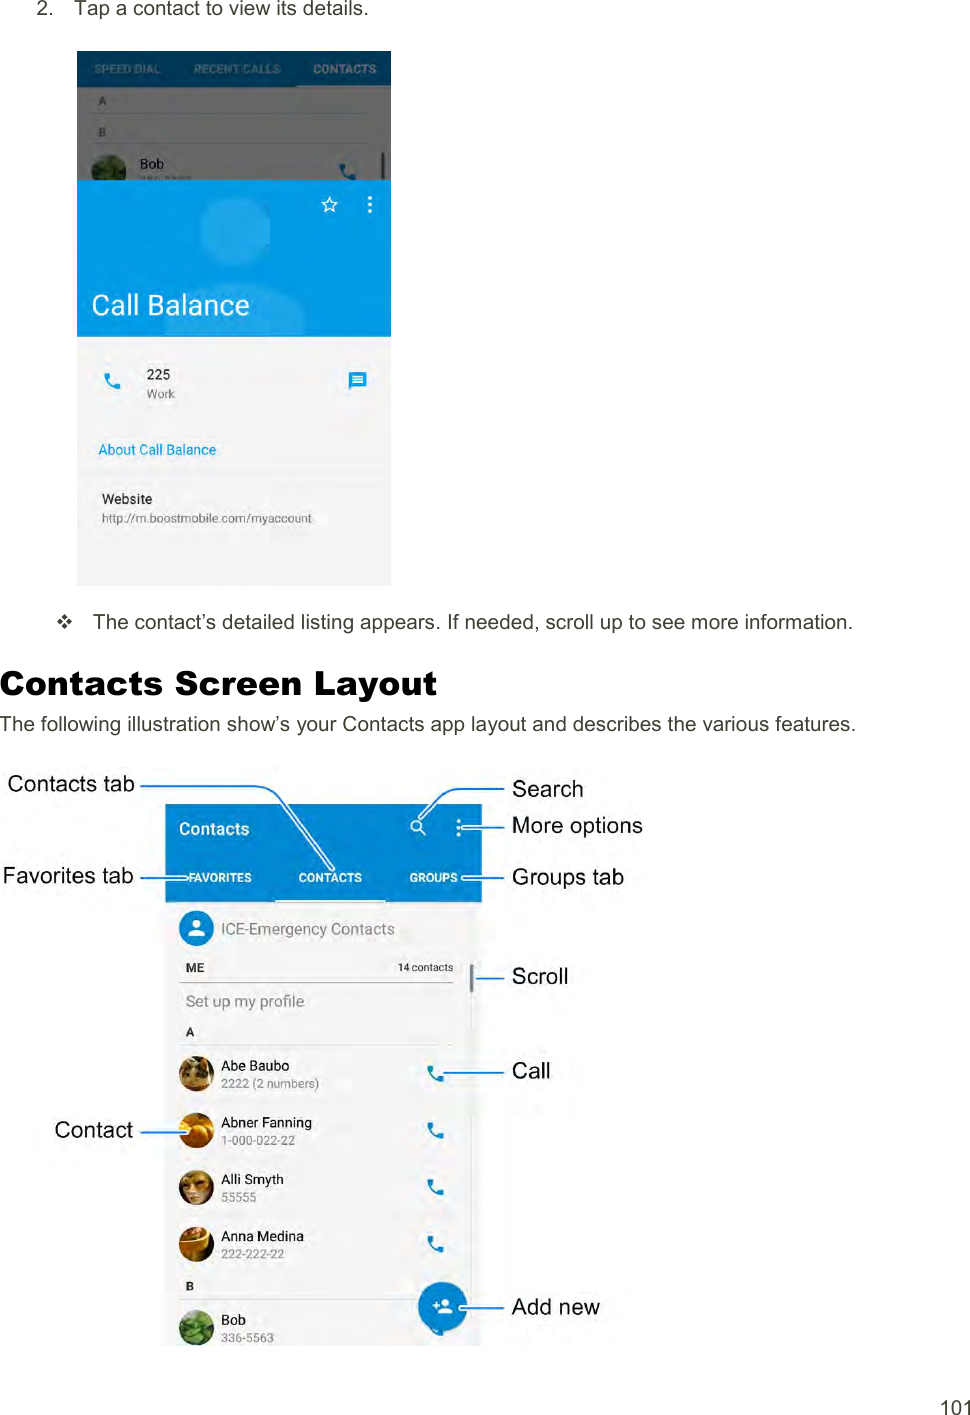  101 2.  Tap a contact to view its details.     The contact’s detailed listing appears. If needed, scroll up to see more information. Contacts Screen Layout The following illustration show’s your Contacts app layout and describes the various features.   